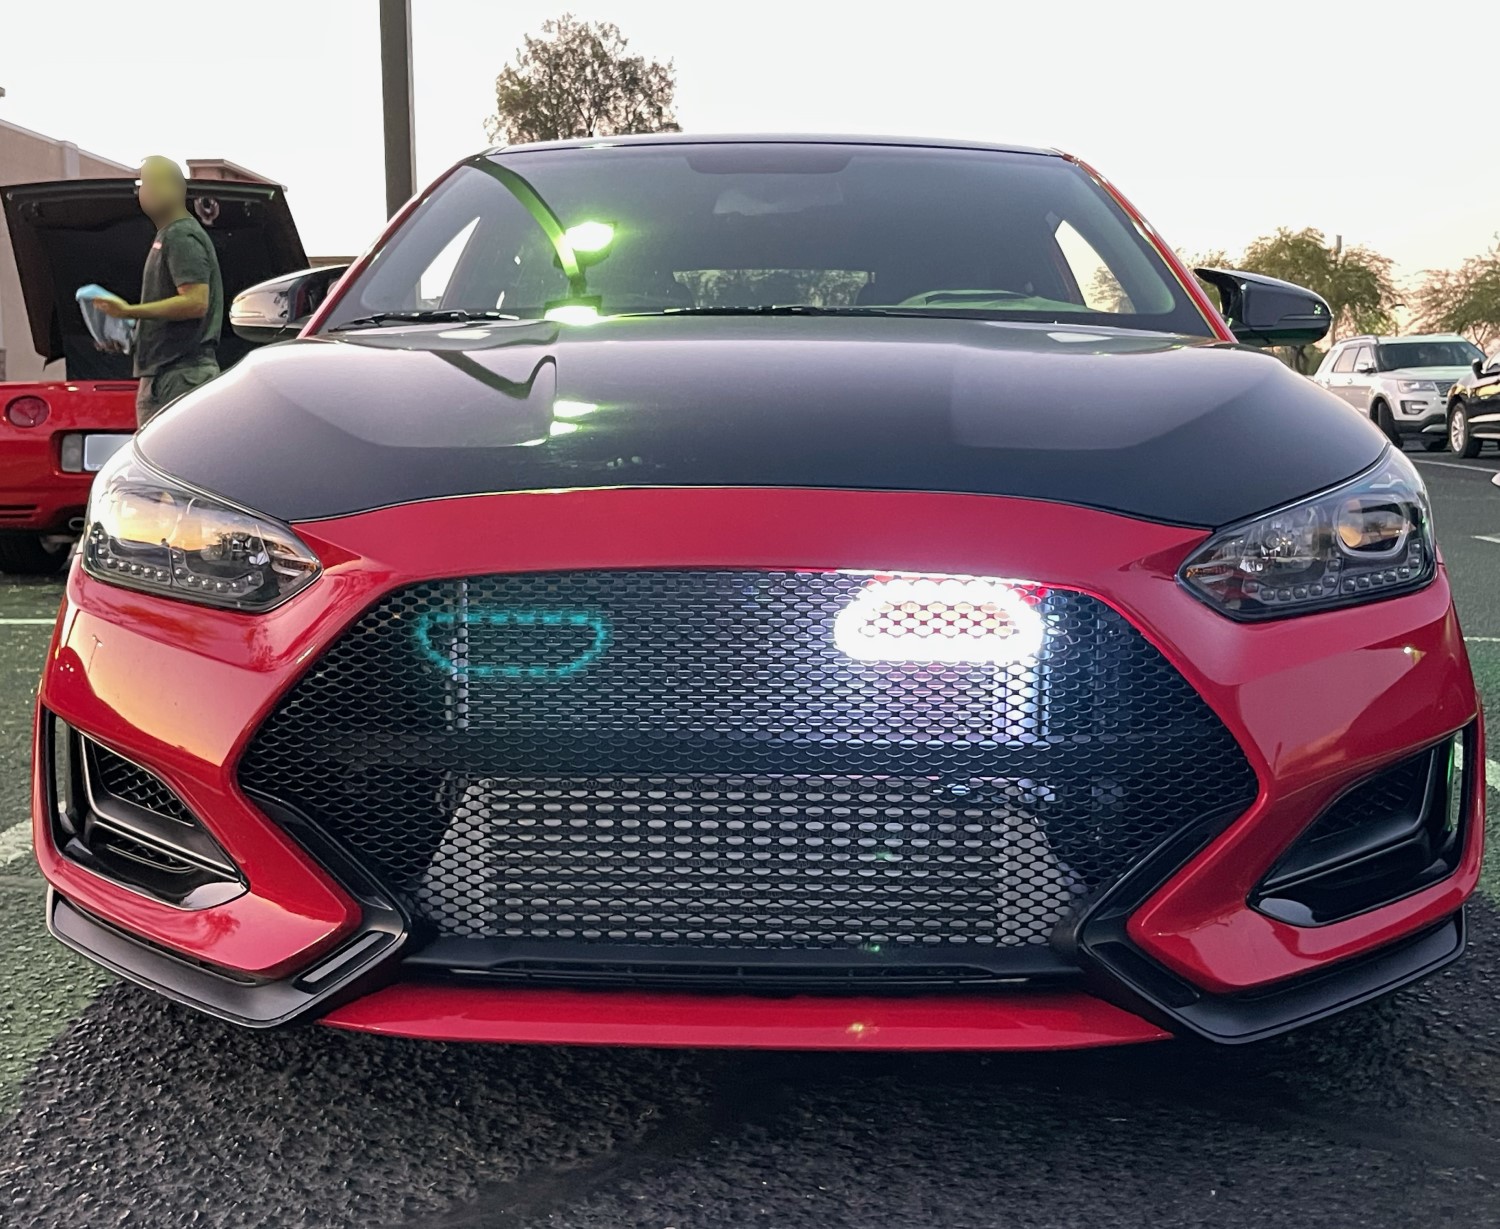 Sporty and Unique: 2nd Gen Veloster with Custom Grille and Light-Up Air Intake